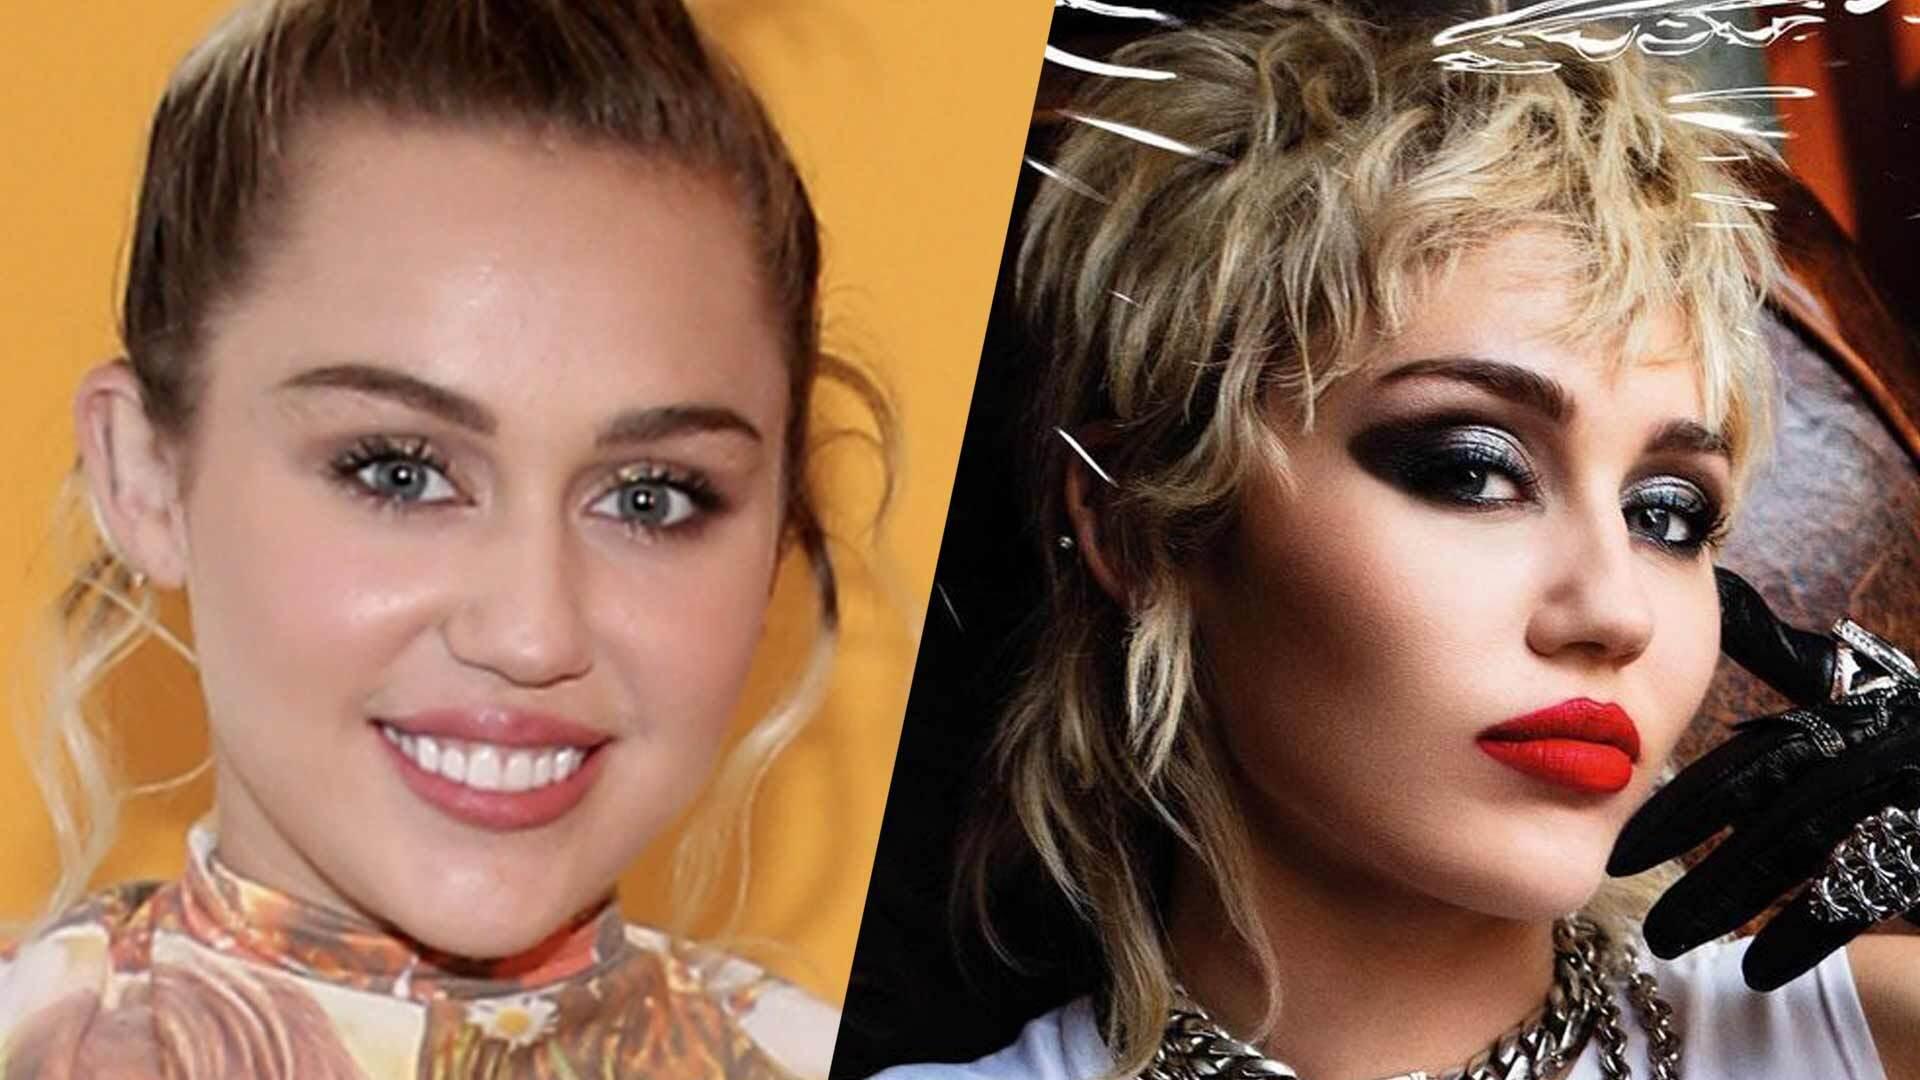 Miley Cyrus ‘Plastic Hearts’ Fresh Face, Plastic Surgeons Weigh In